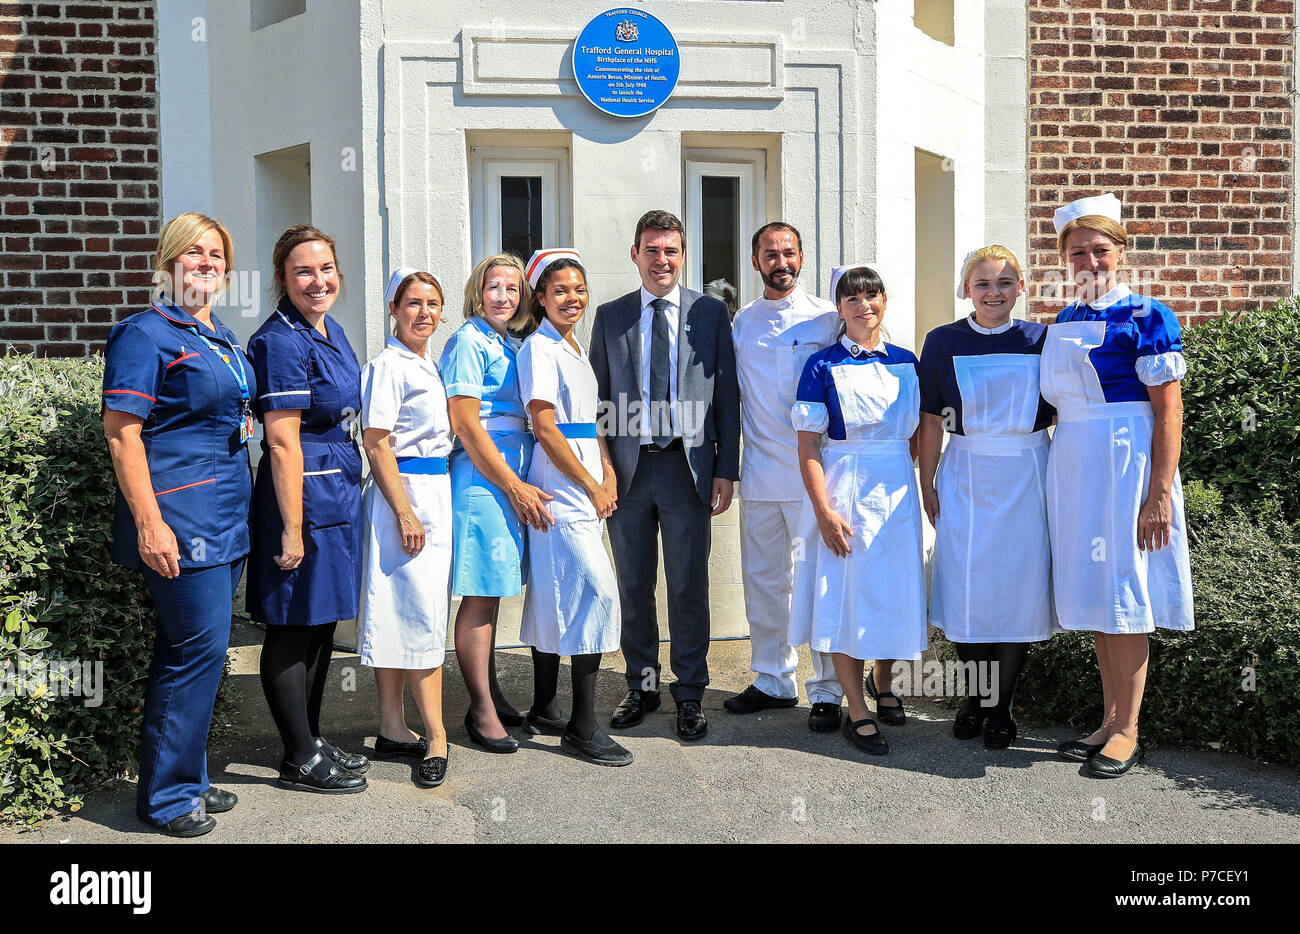 Mayor of Greater Manchester Andy Burnham, with nurses dressed in uniforms from the past 70 years, during his visit to Trafford General Hospital in Manchester to mark the 70th anniversary of the NHS. Stock Photo